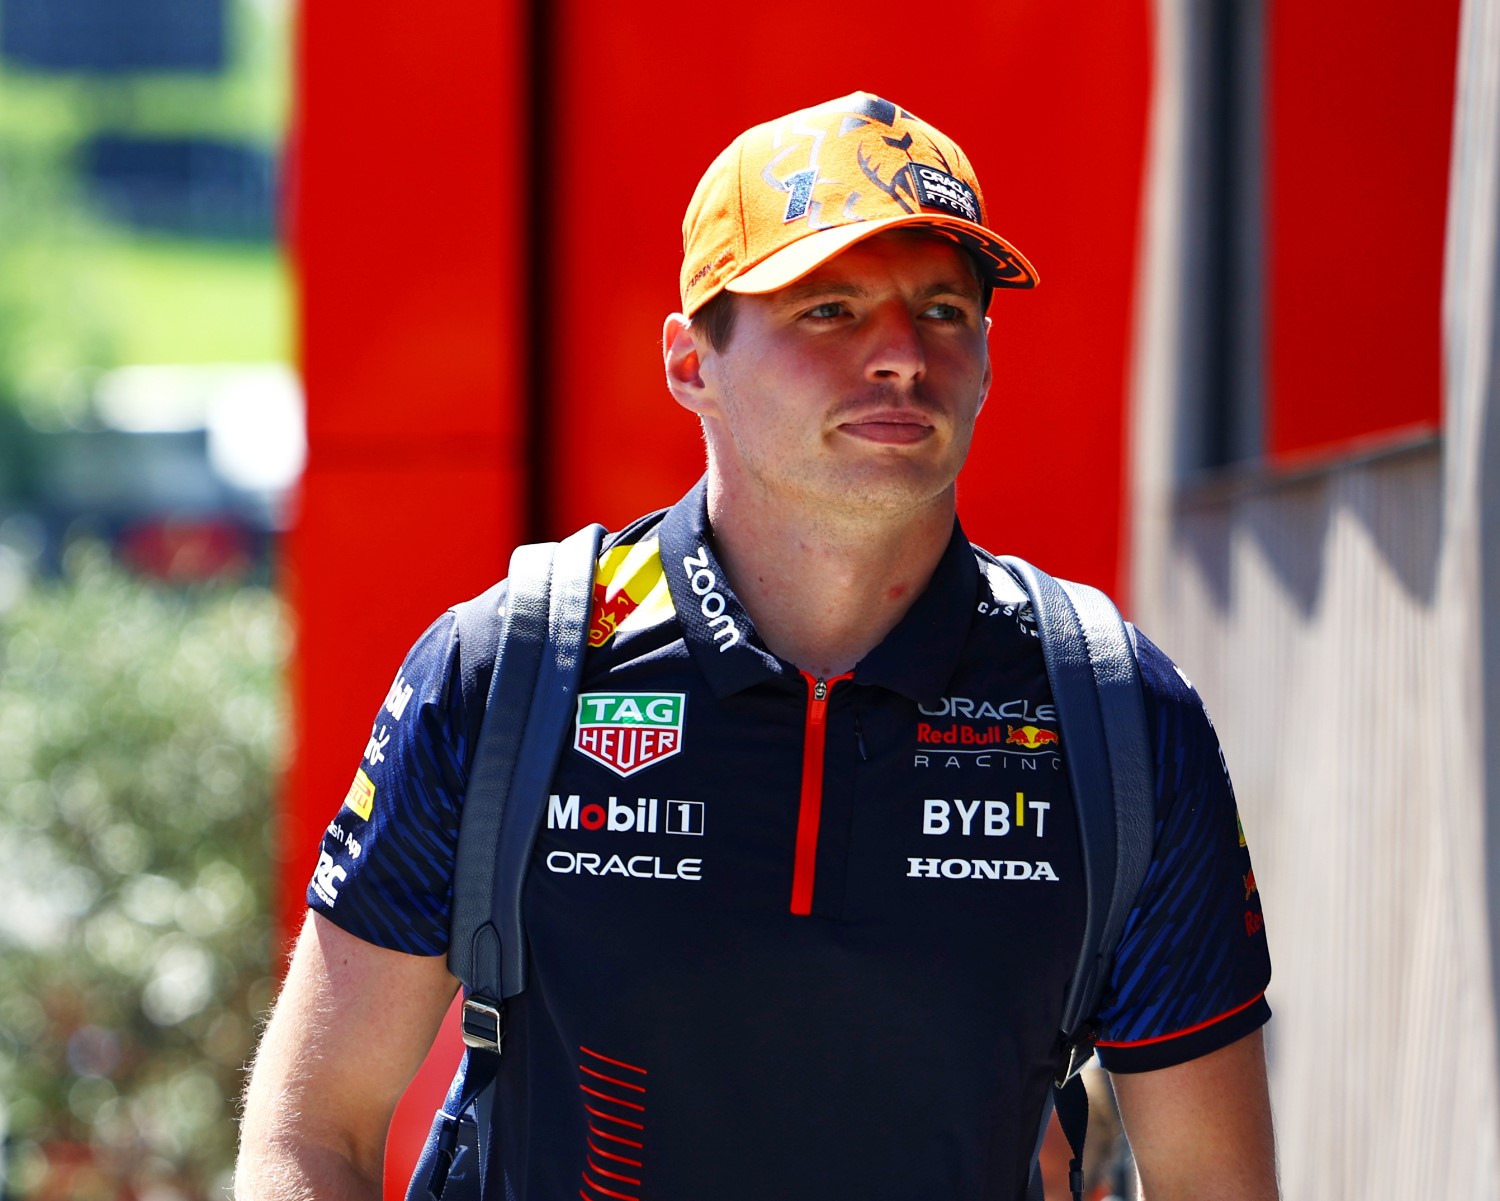 Perhaps we are seeing the best-ever. Max Verstappen of the Netherlands